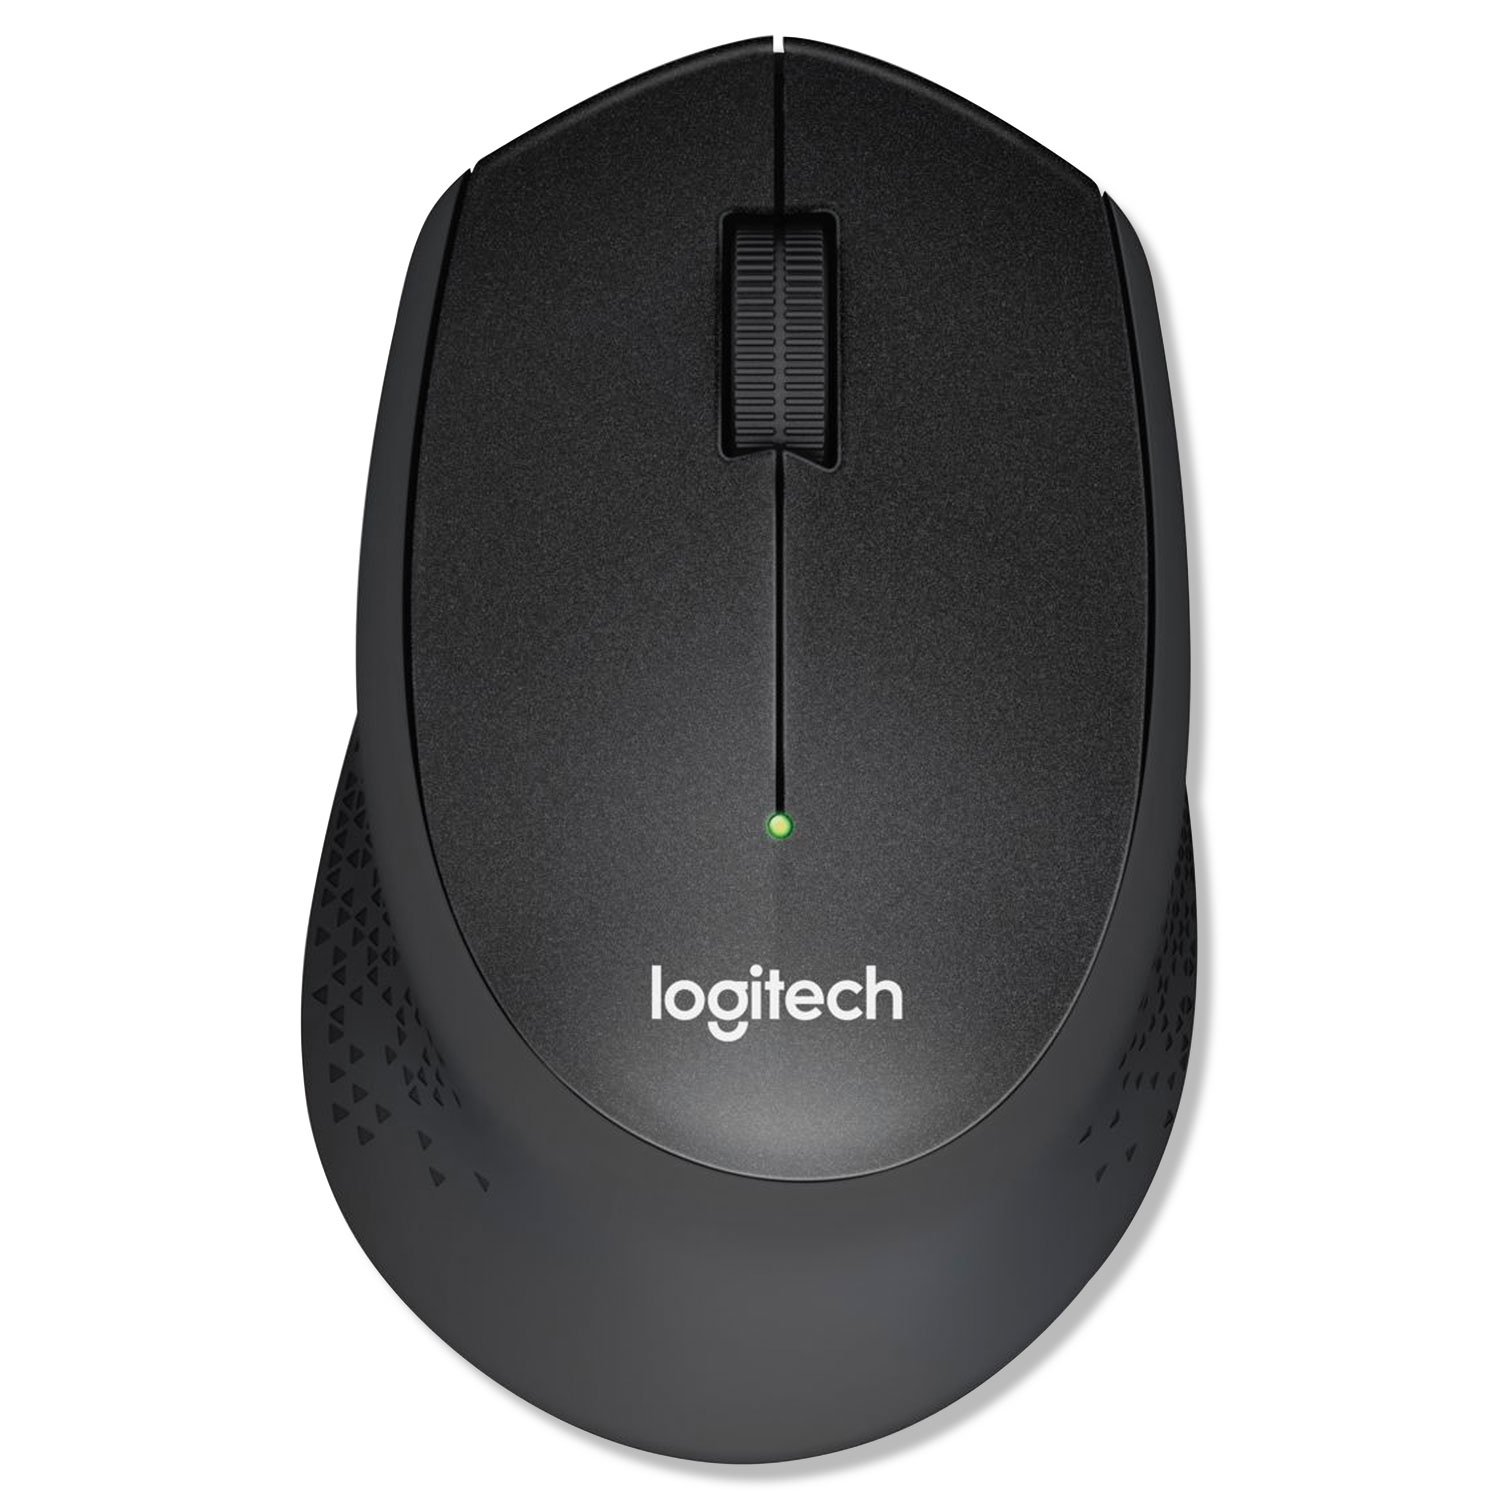  Logitech 910-004905 M330 Silent Plus Mouse, 2.4 GHz Frequency/33 ft Wireless Range, Right Hand Use, Black (LOG910004905) 